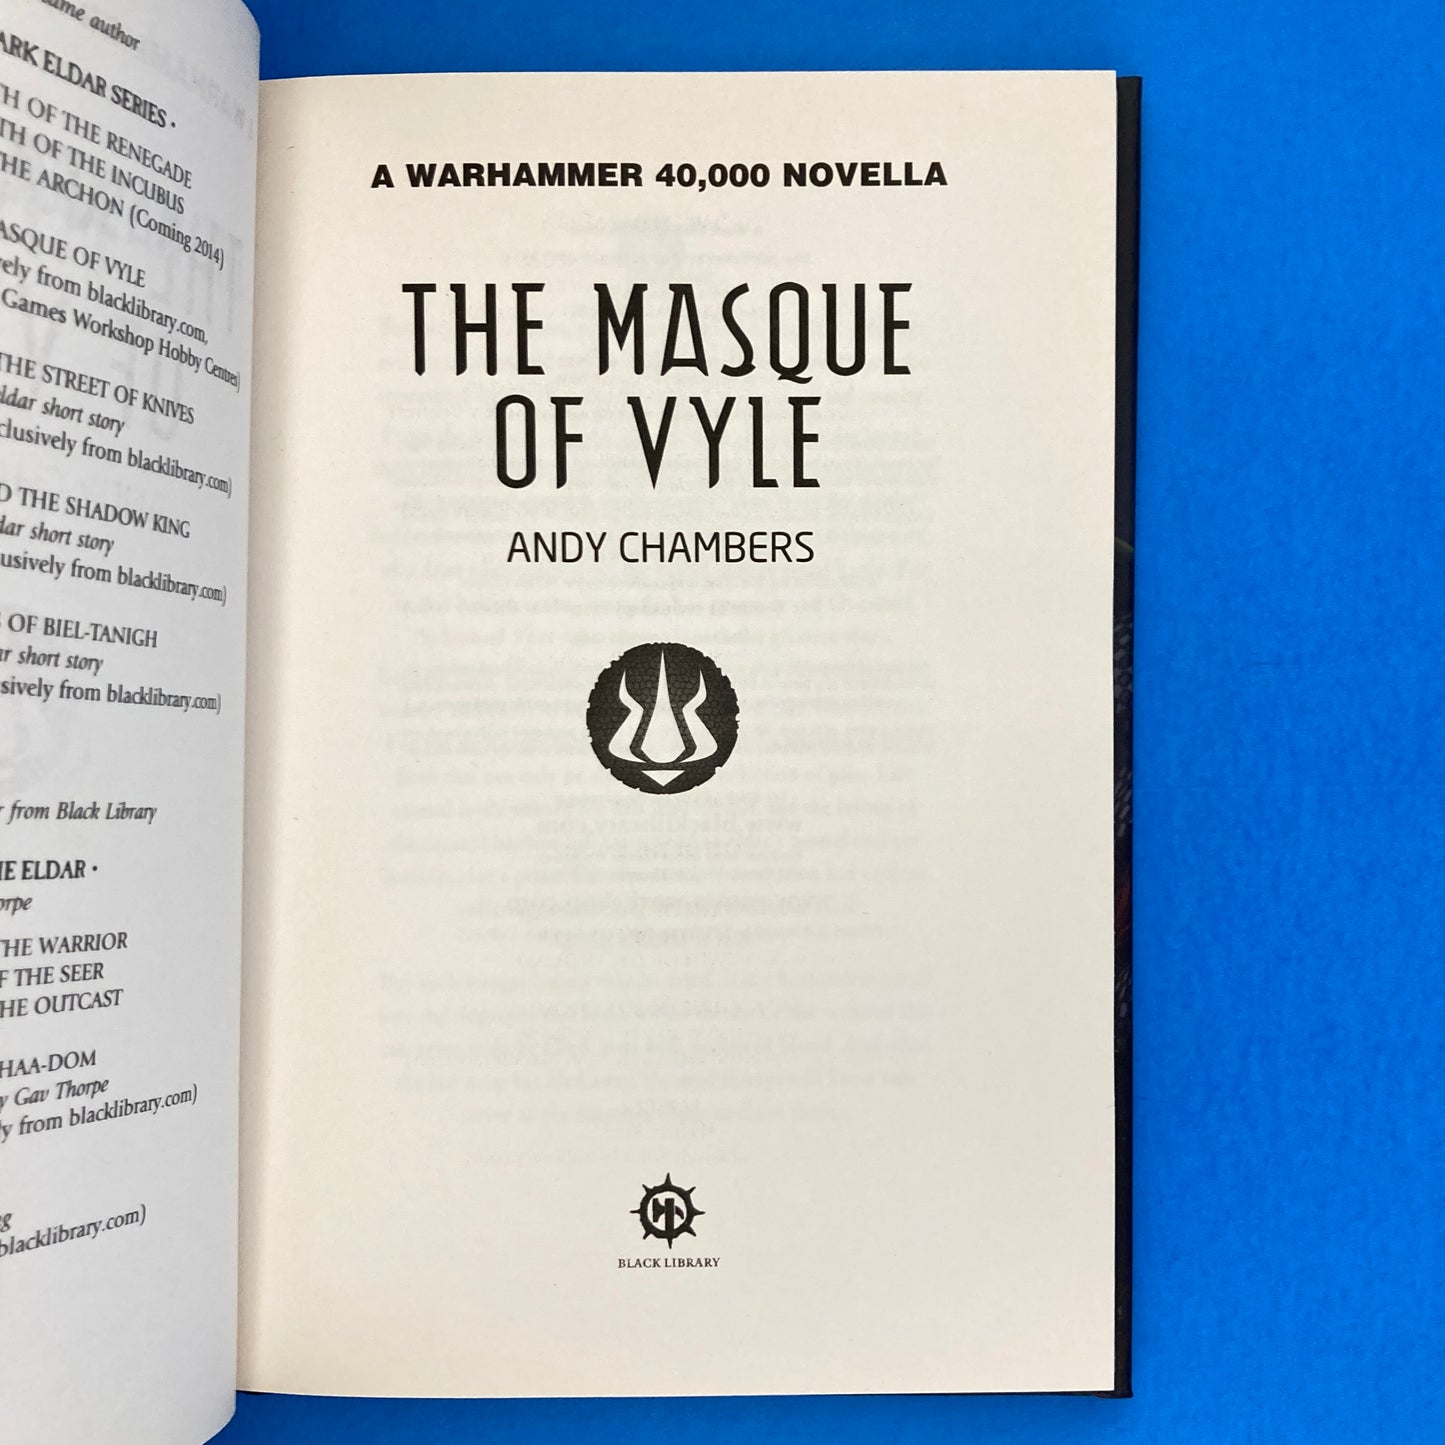 The Masque of Vyle